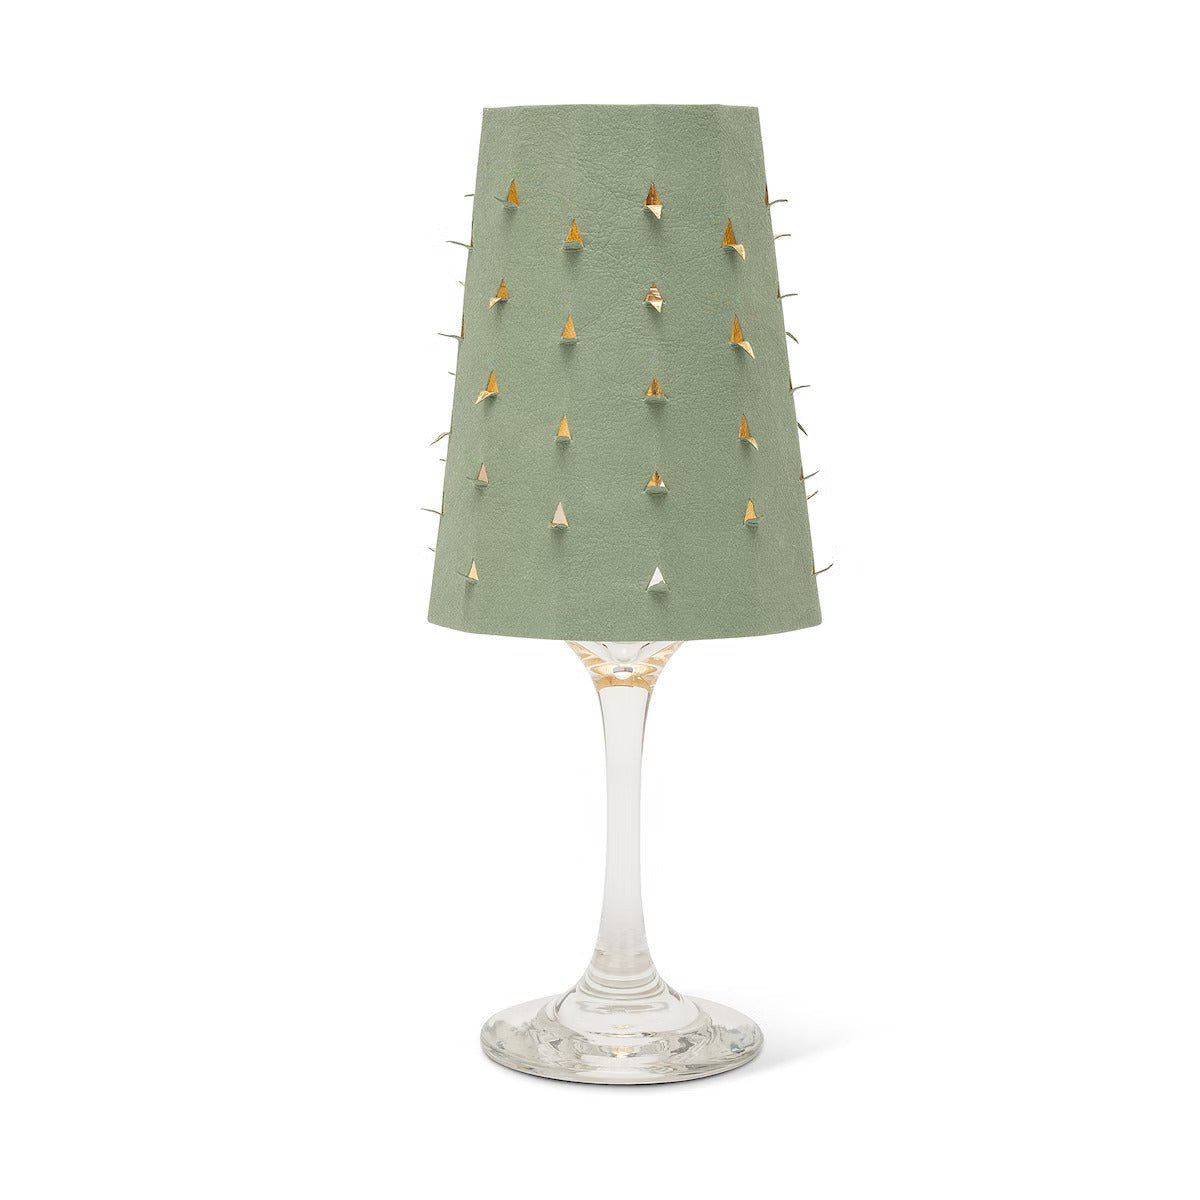 A sage green washable paper lampshade with cut out details is shown sitting atop a wine glass.